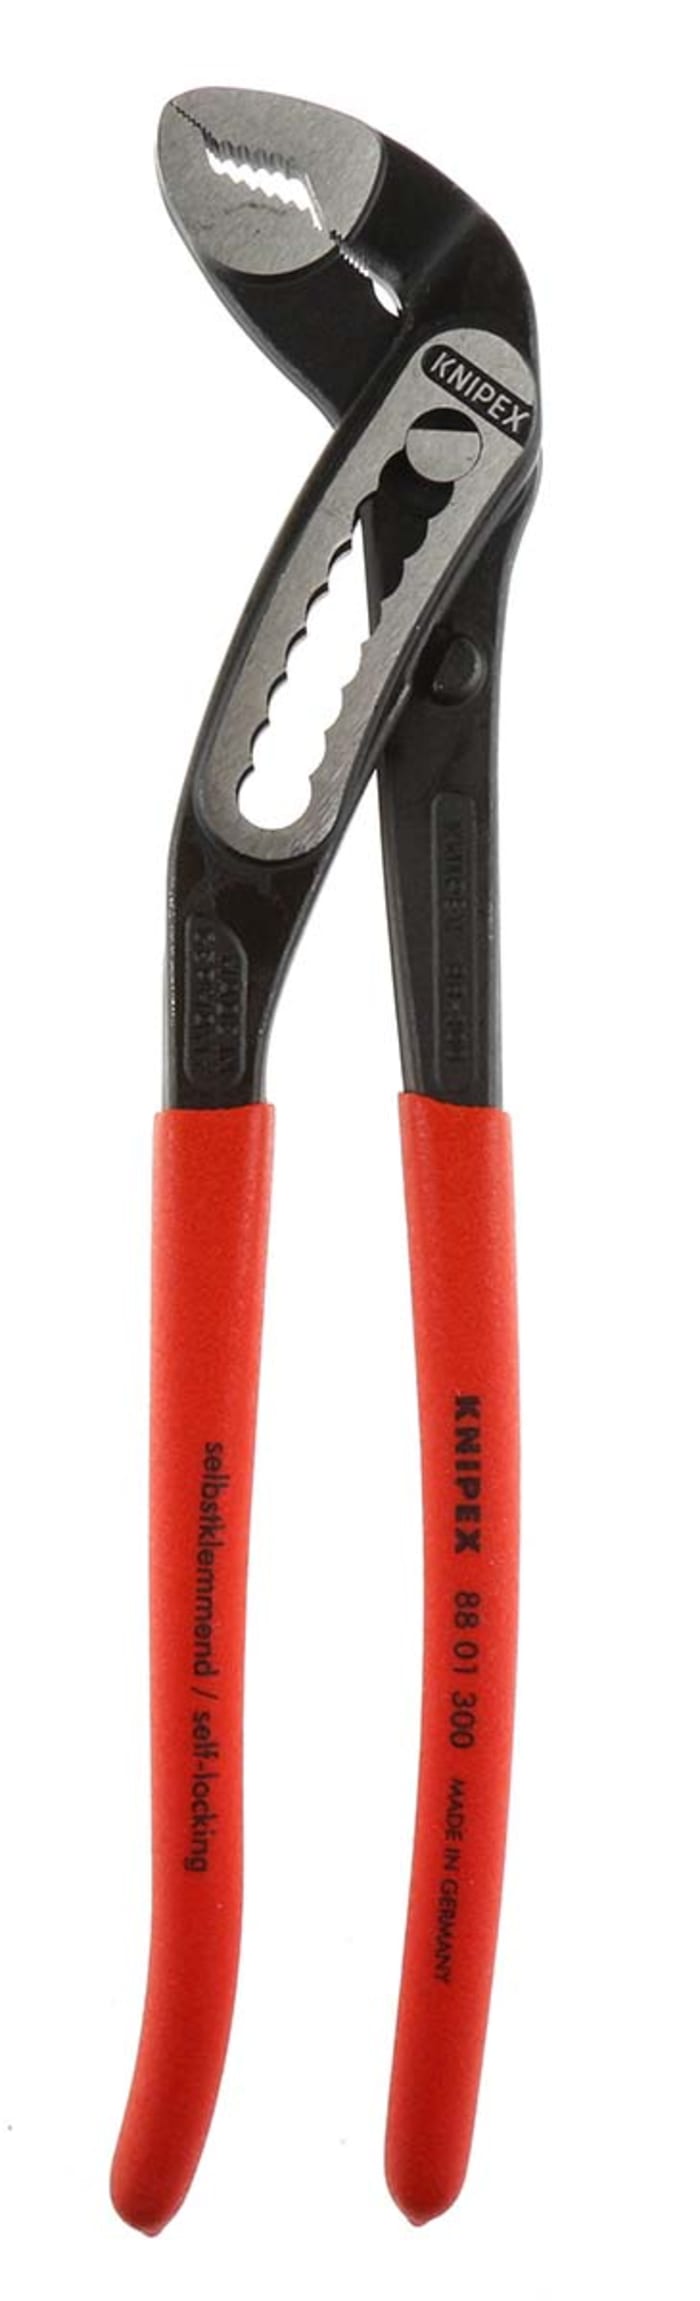 88 01 300 Knipex Knipex Water Pump Pliers Water Pump Pliers, 300 Mm Overall  Length 517-8473 RS Components